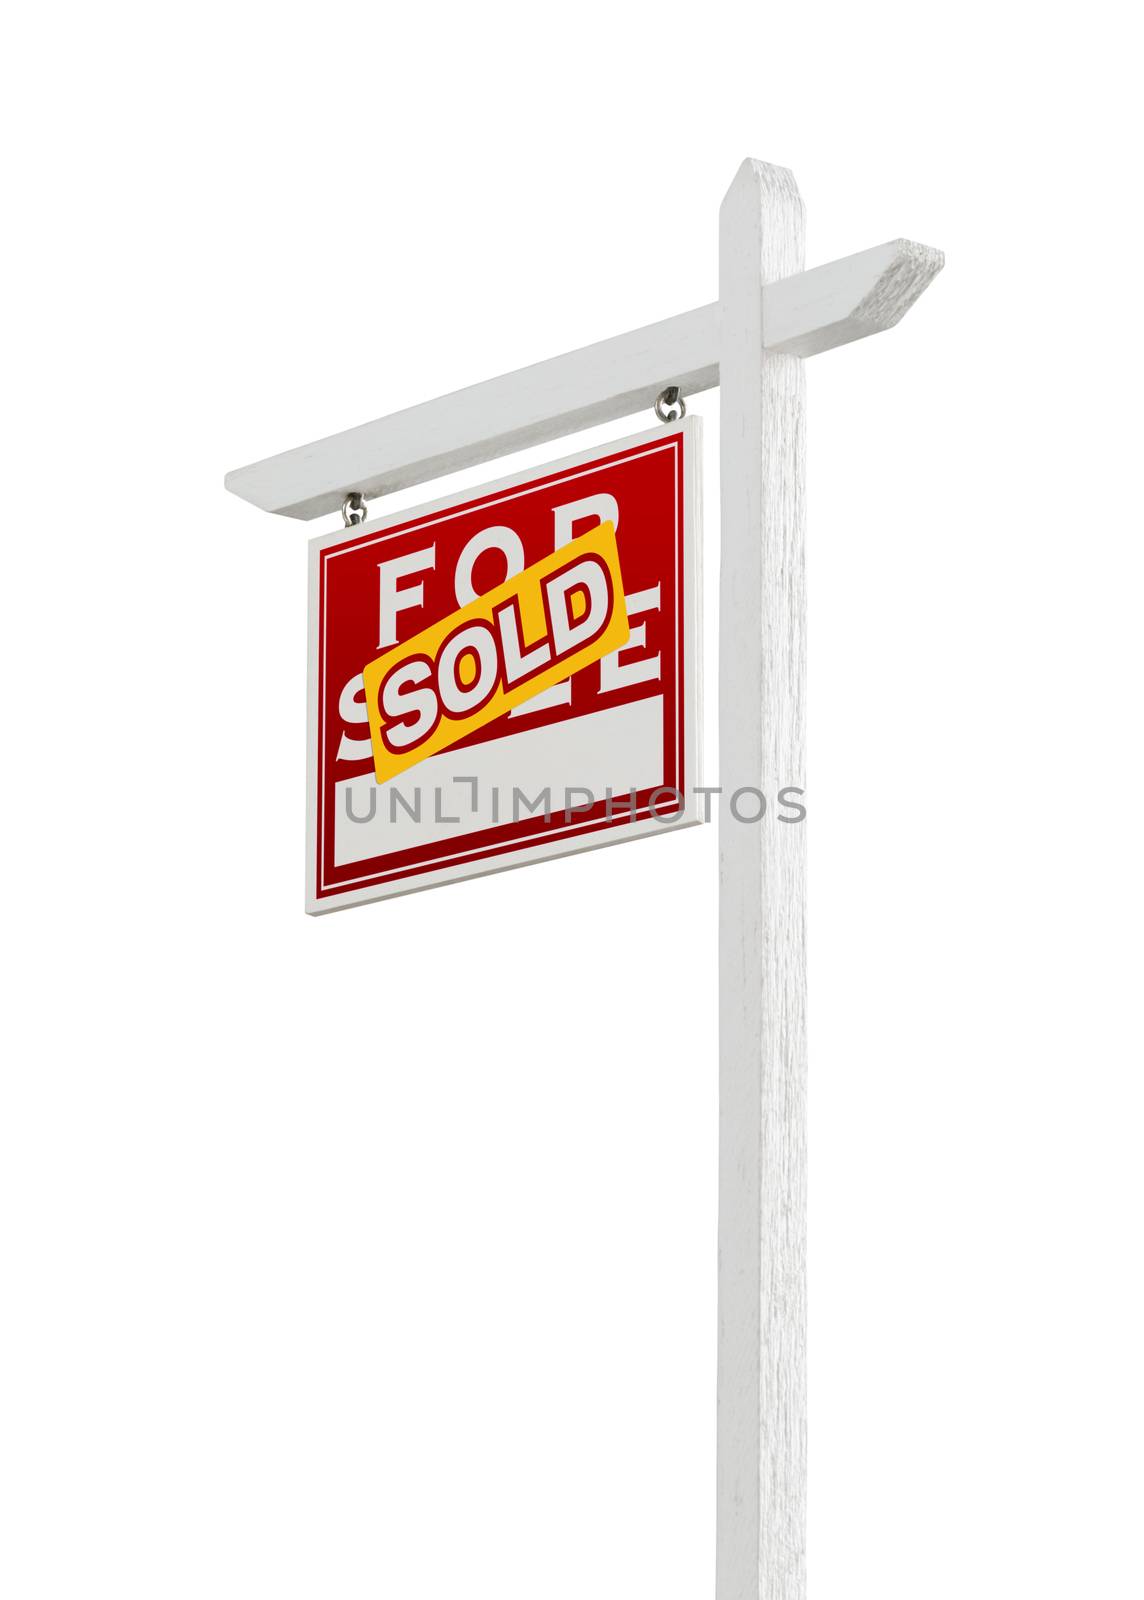 Left Facing Sold For Sale Real Estate Sign Isolated on a White B by Feverpitched